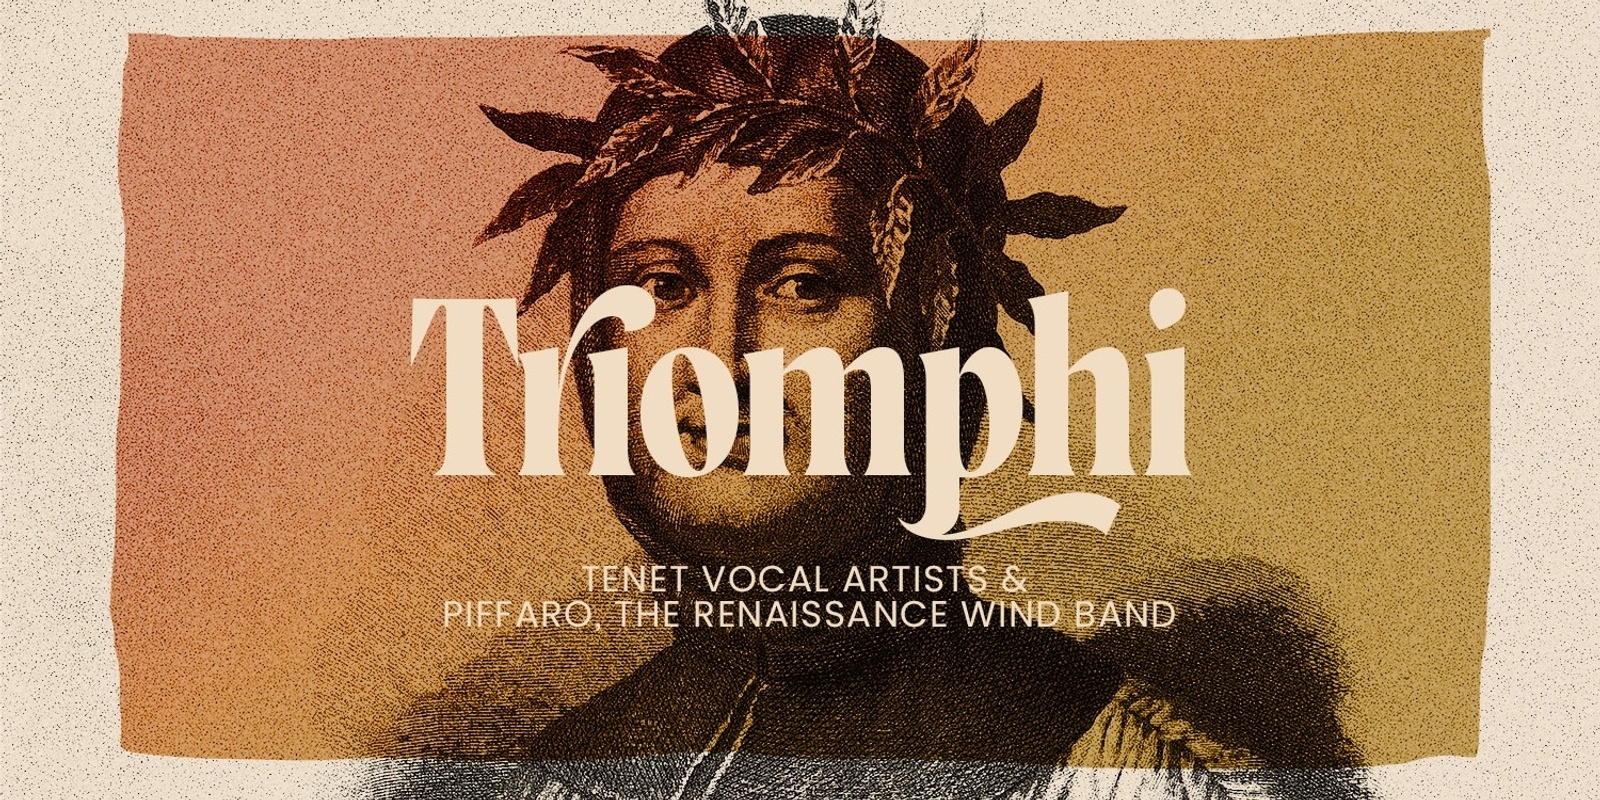 Banner image for Triomphi Virtual Pass